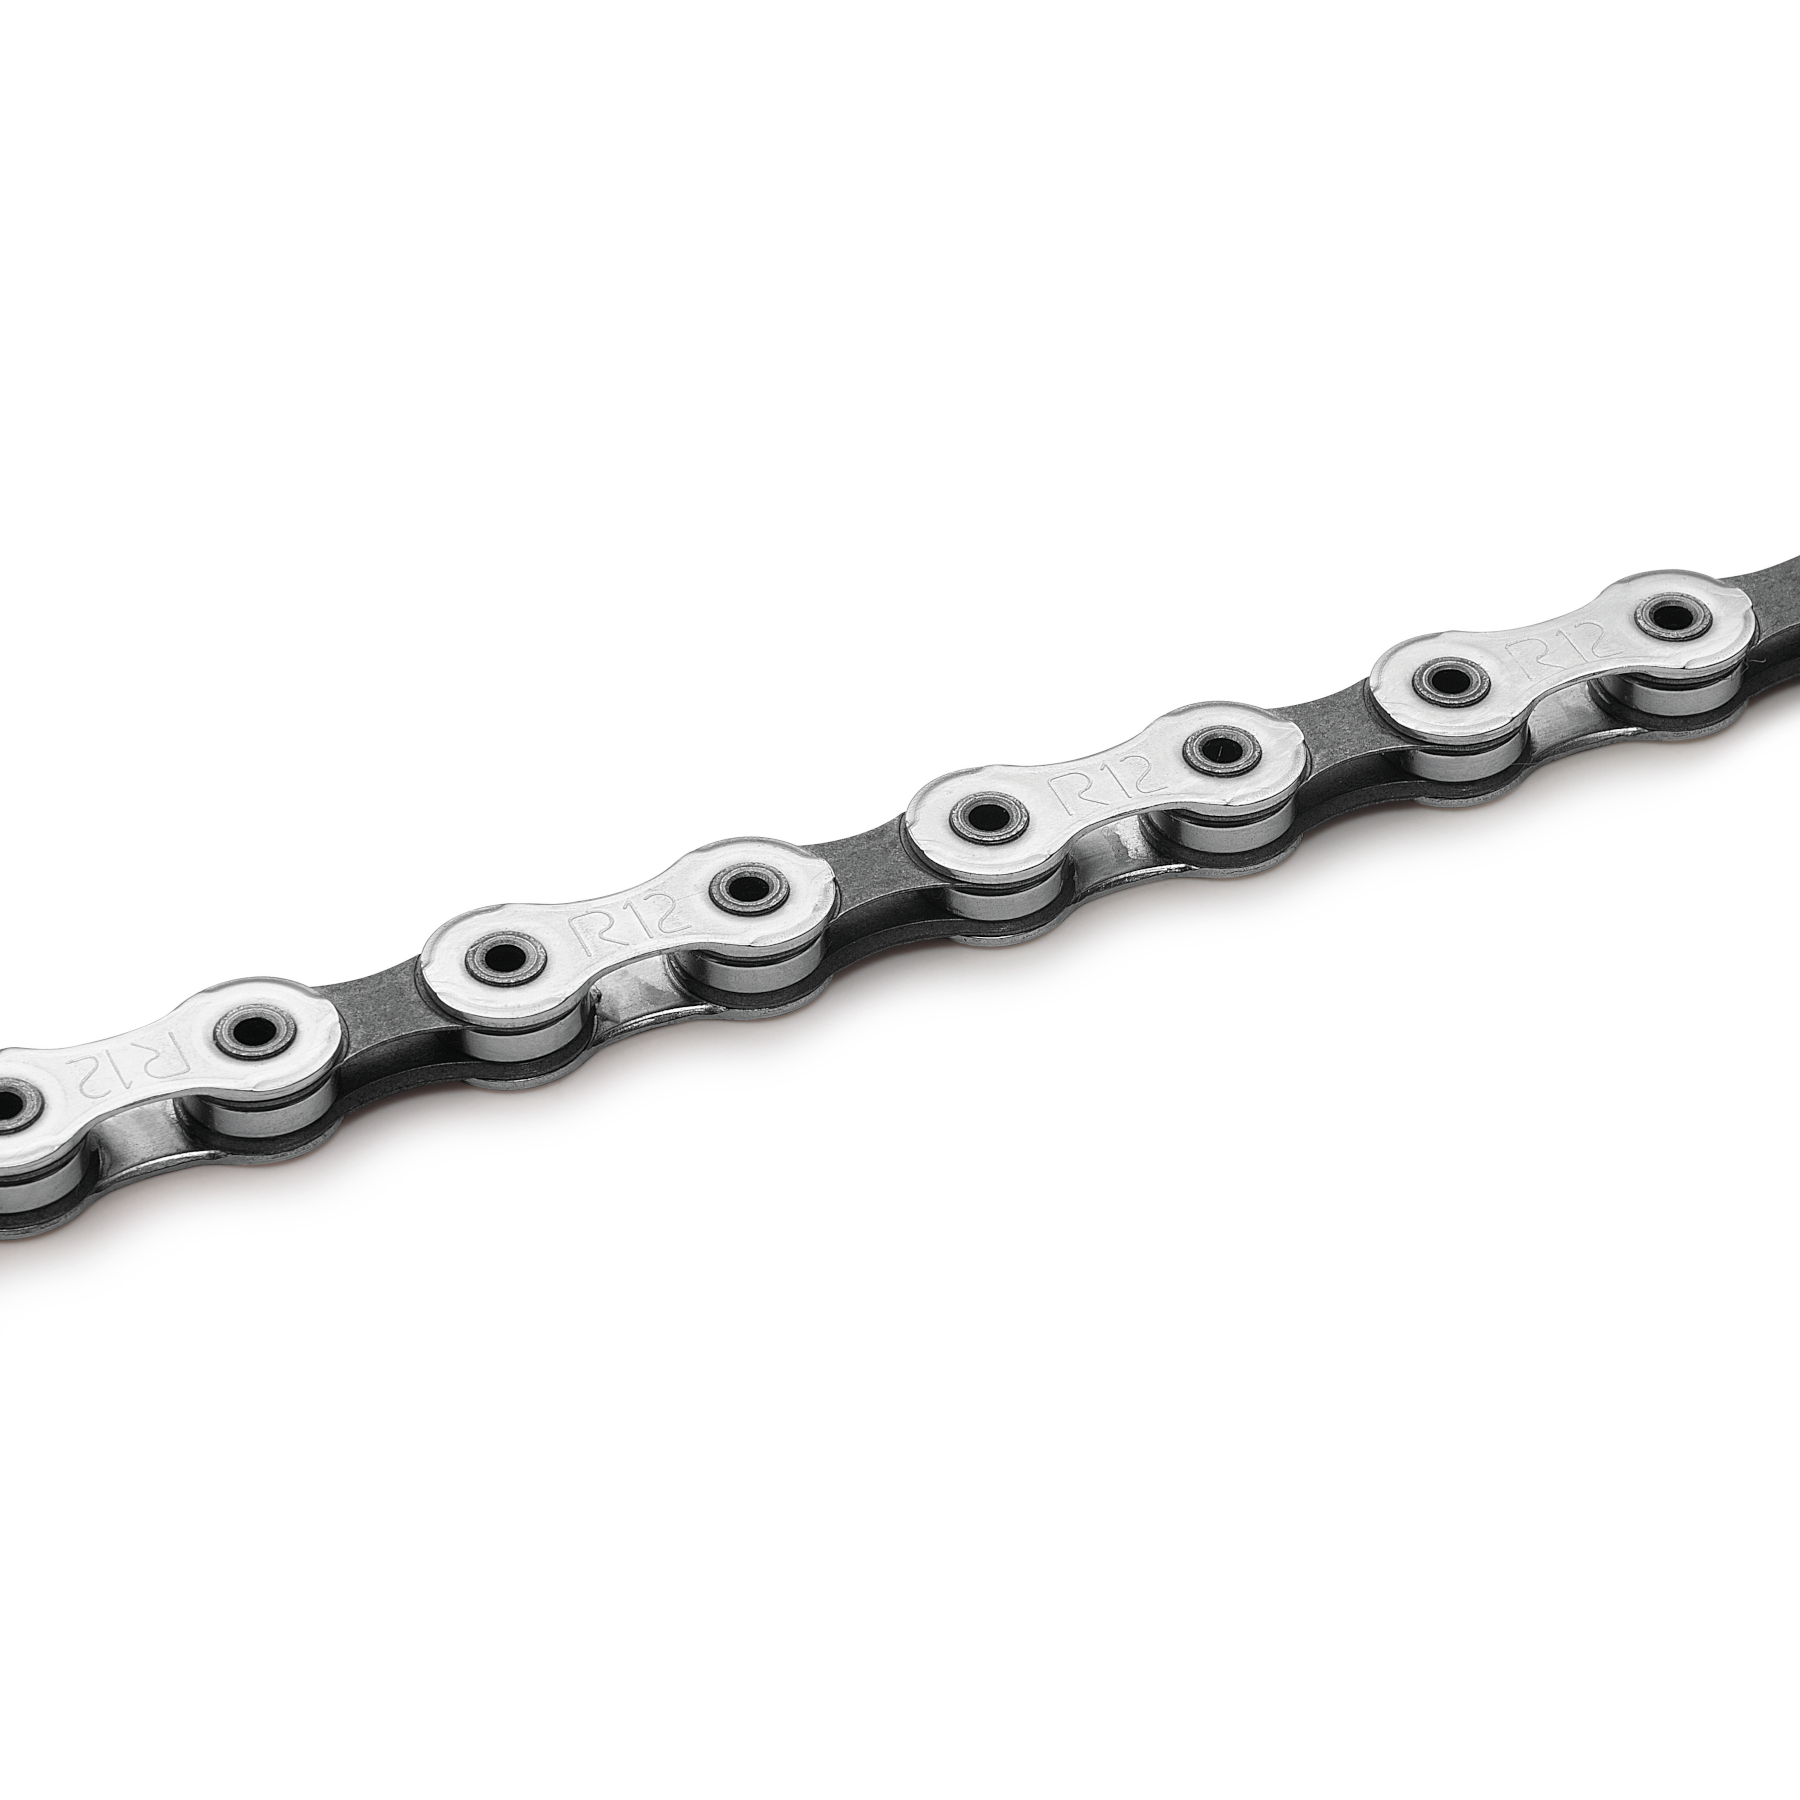 Productfoto van Campagnolo Super Record Chain - 12-speed | 113 Links